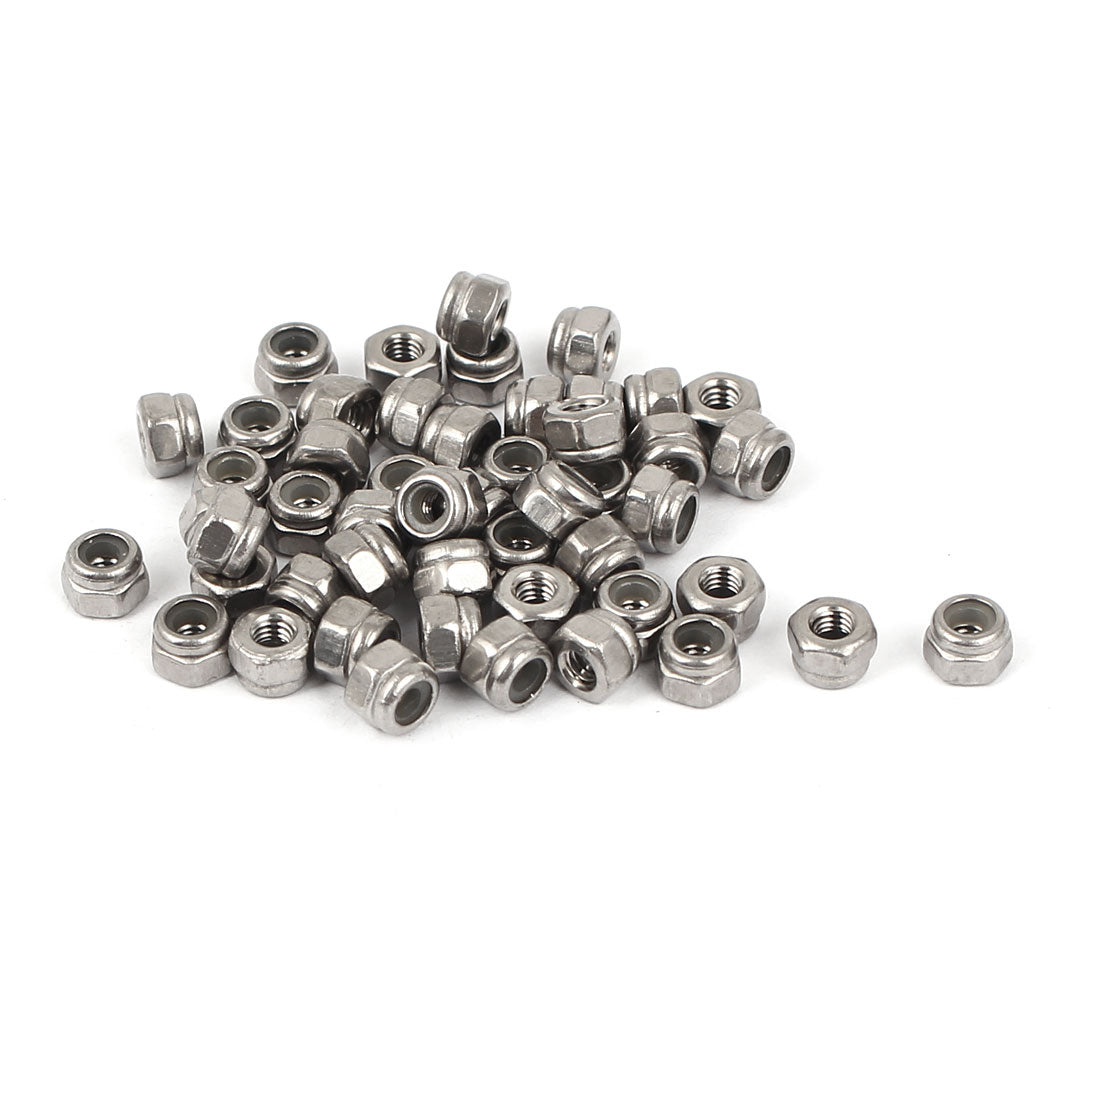 uxcell Uxcell M2.5 304 Stainless Steel  Self-Locking Nylon Insert Hex Lock Nuts 50pcs